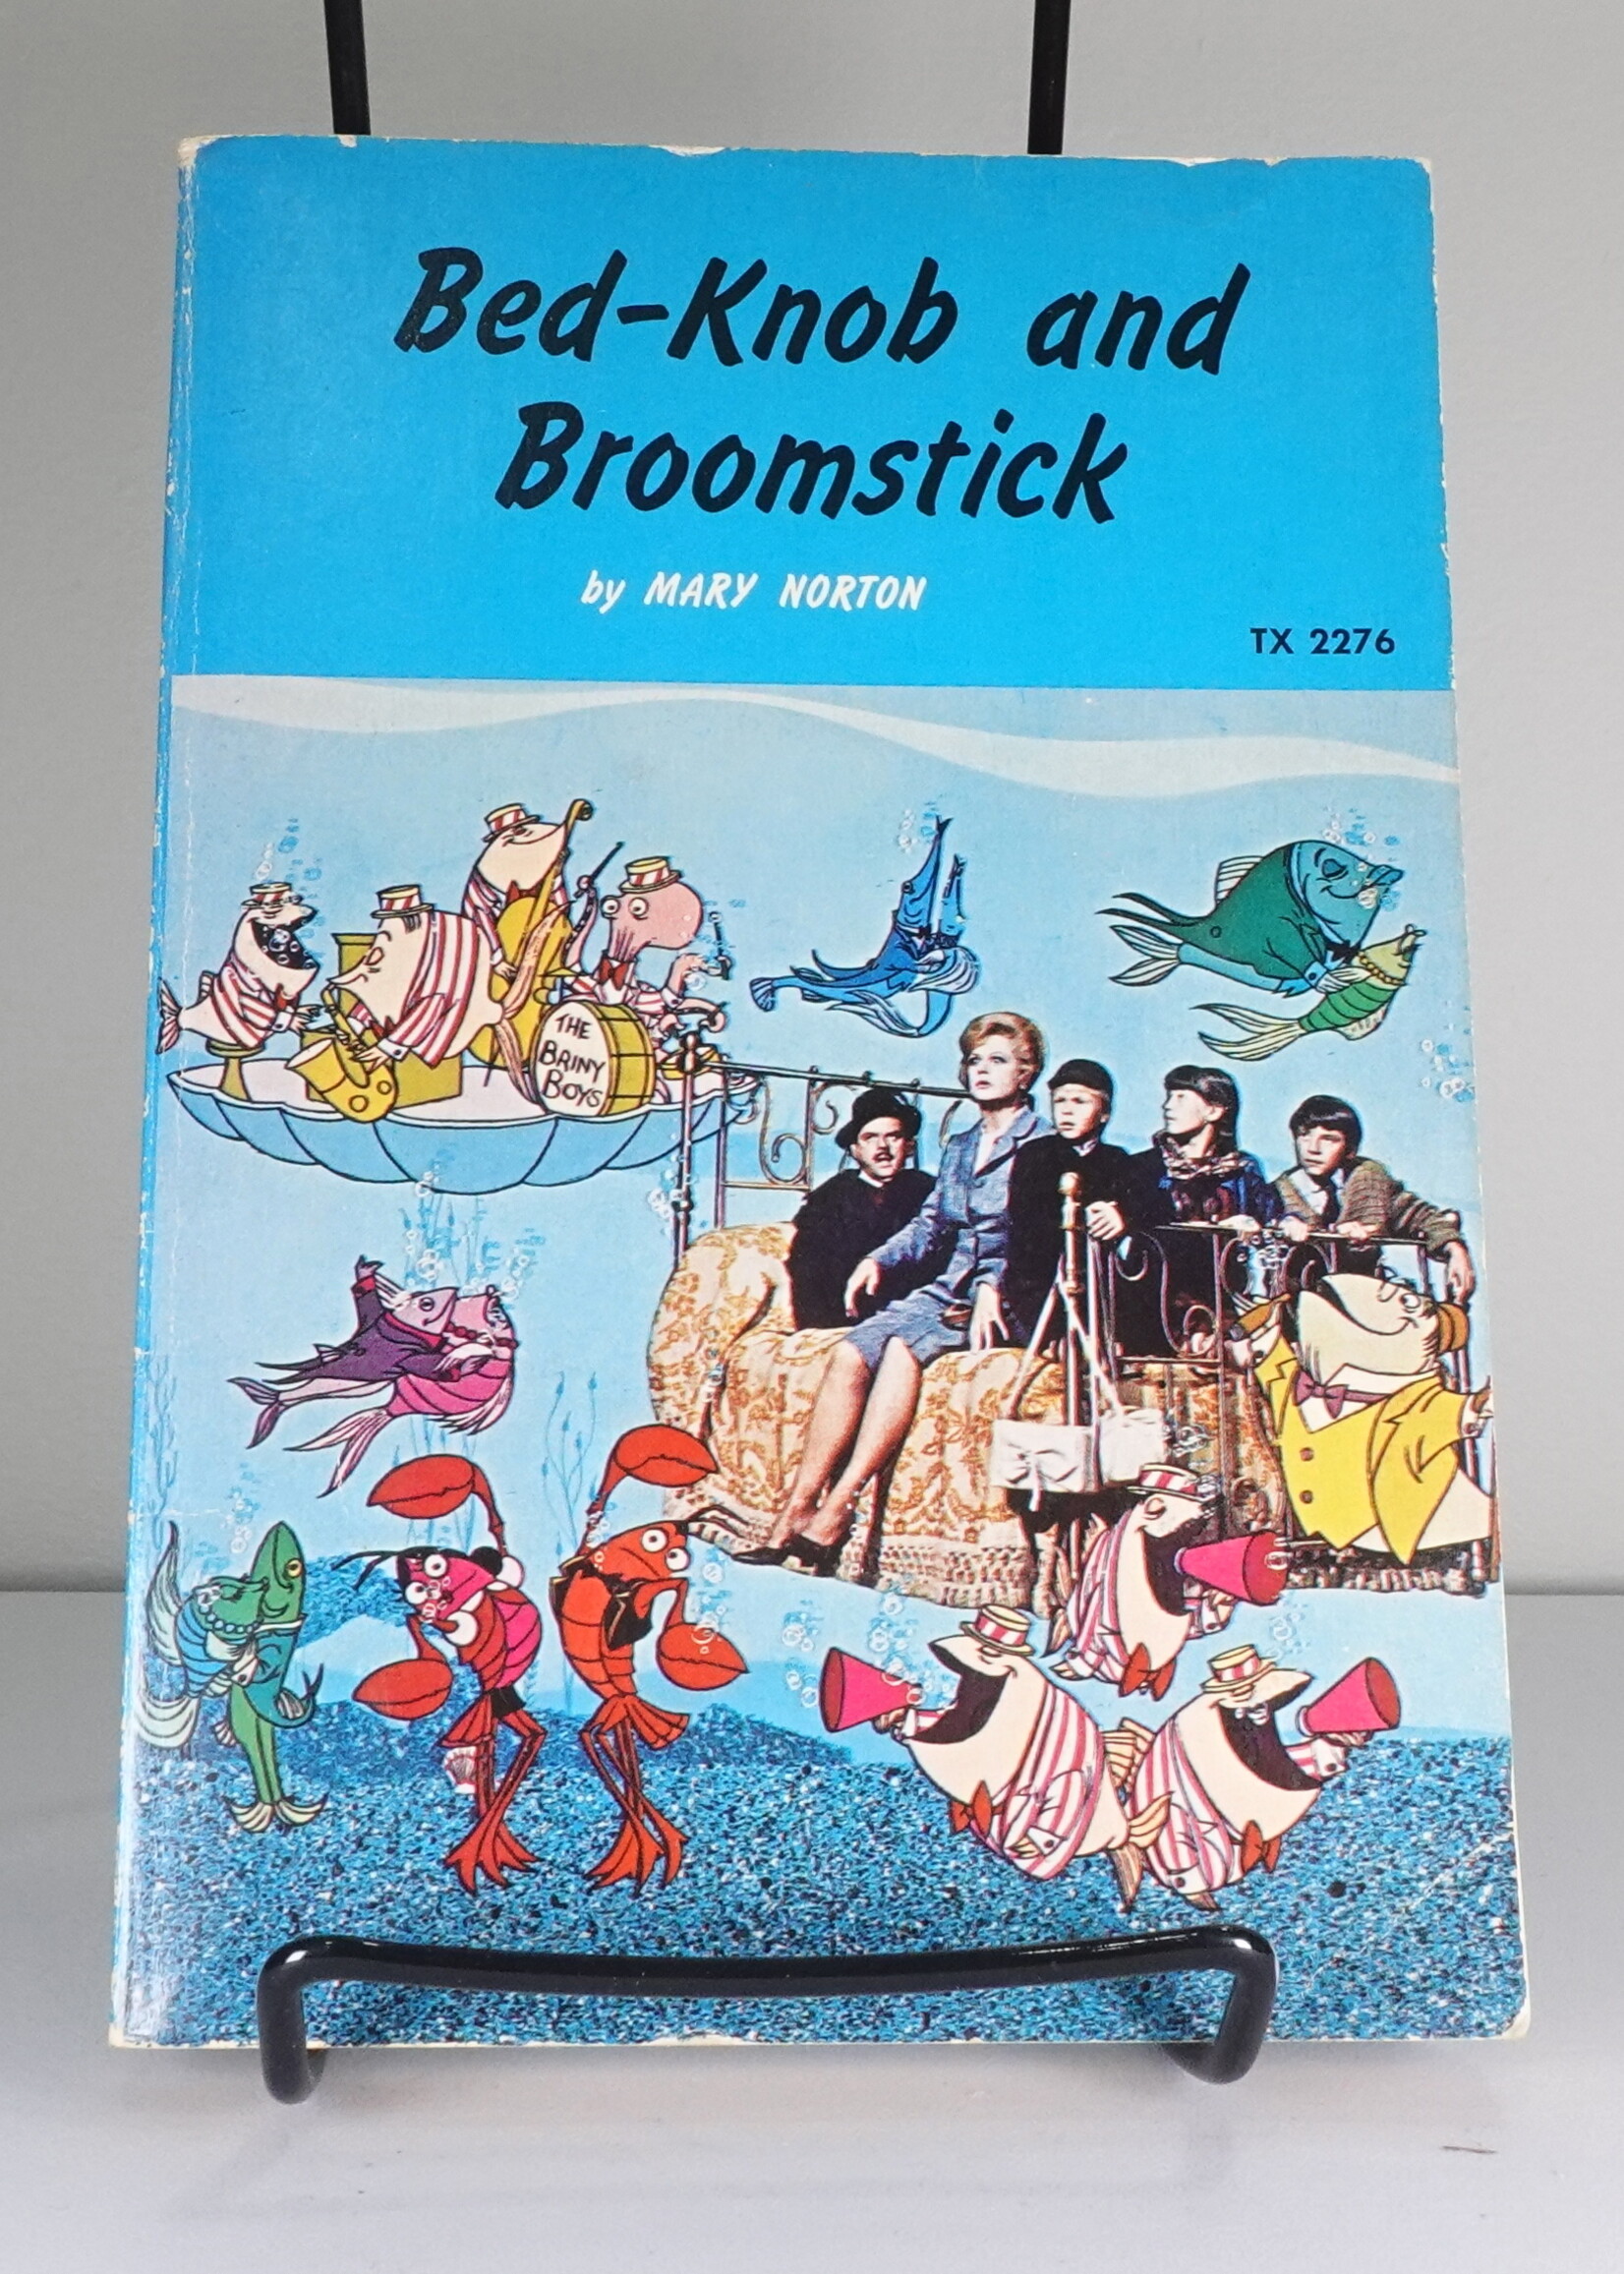 Bed-Knob and Broomstick (A Combined Edition of "The Magic Bed-Knob" and Bonfires and Broomsticks) (Scholastic Books # TX2276)